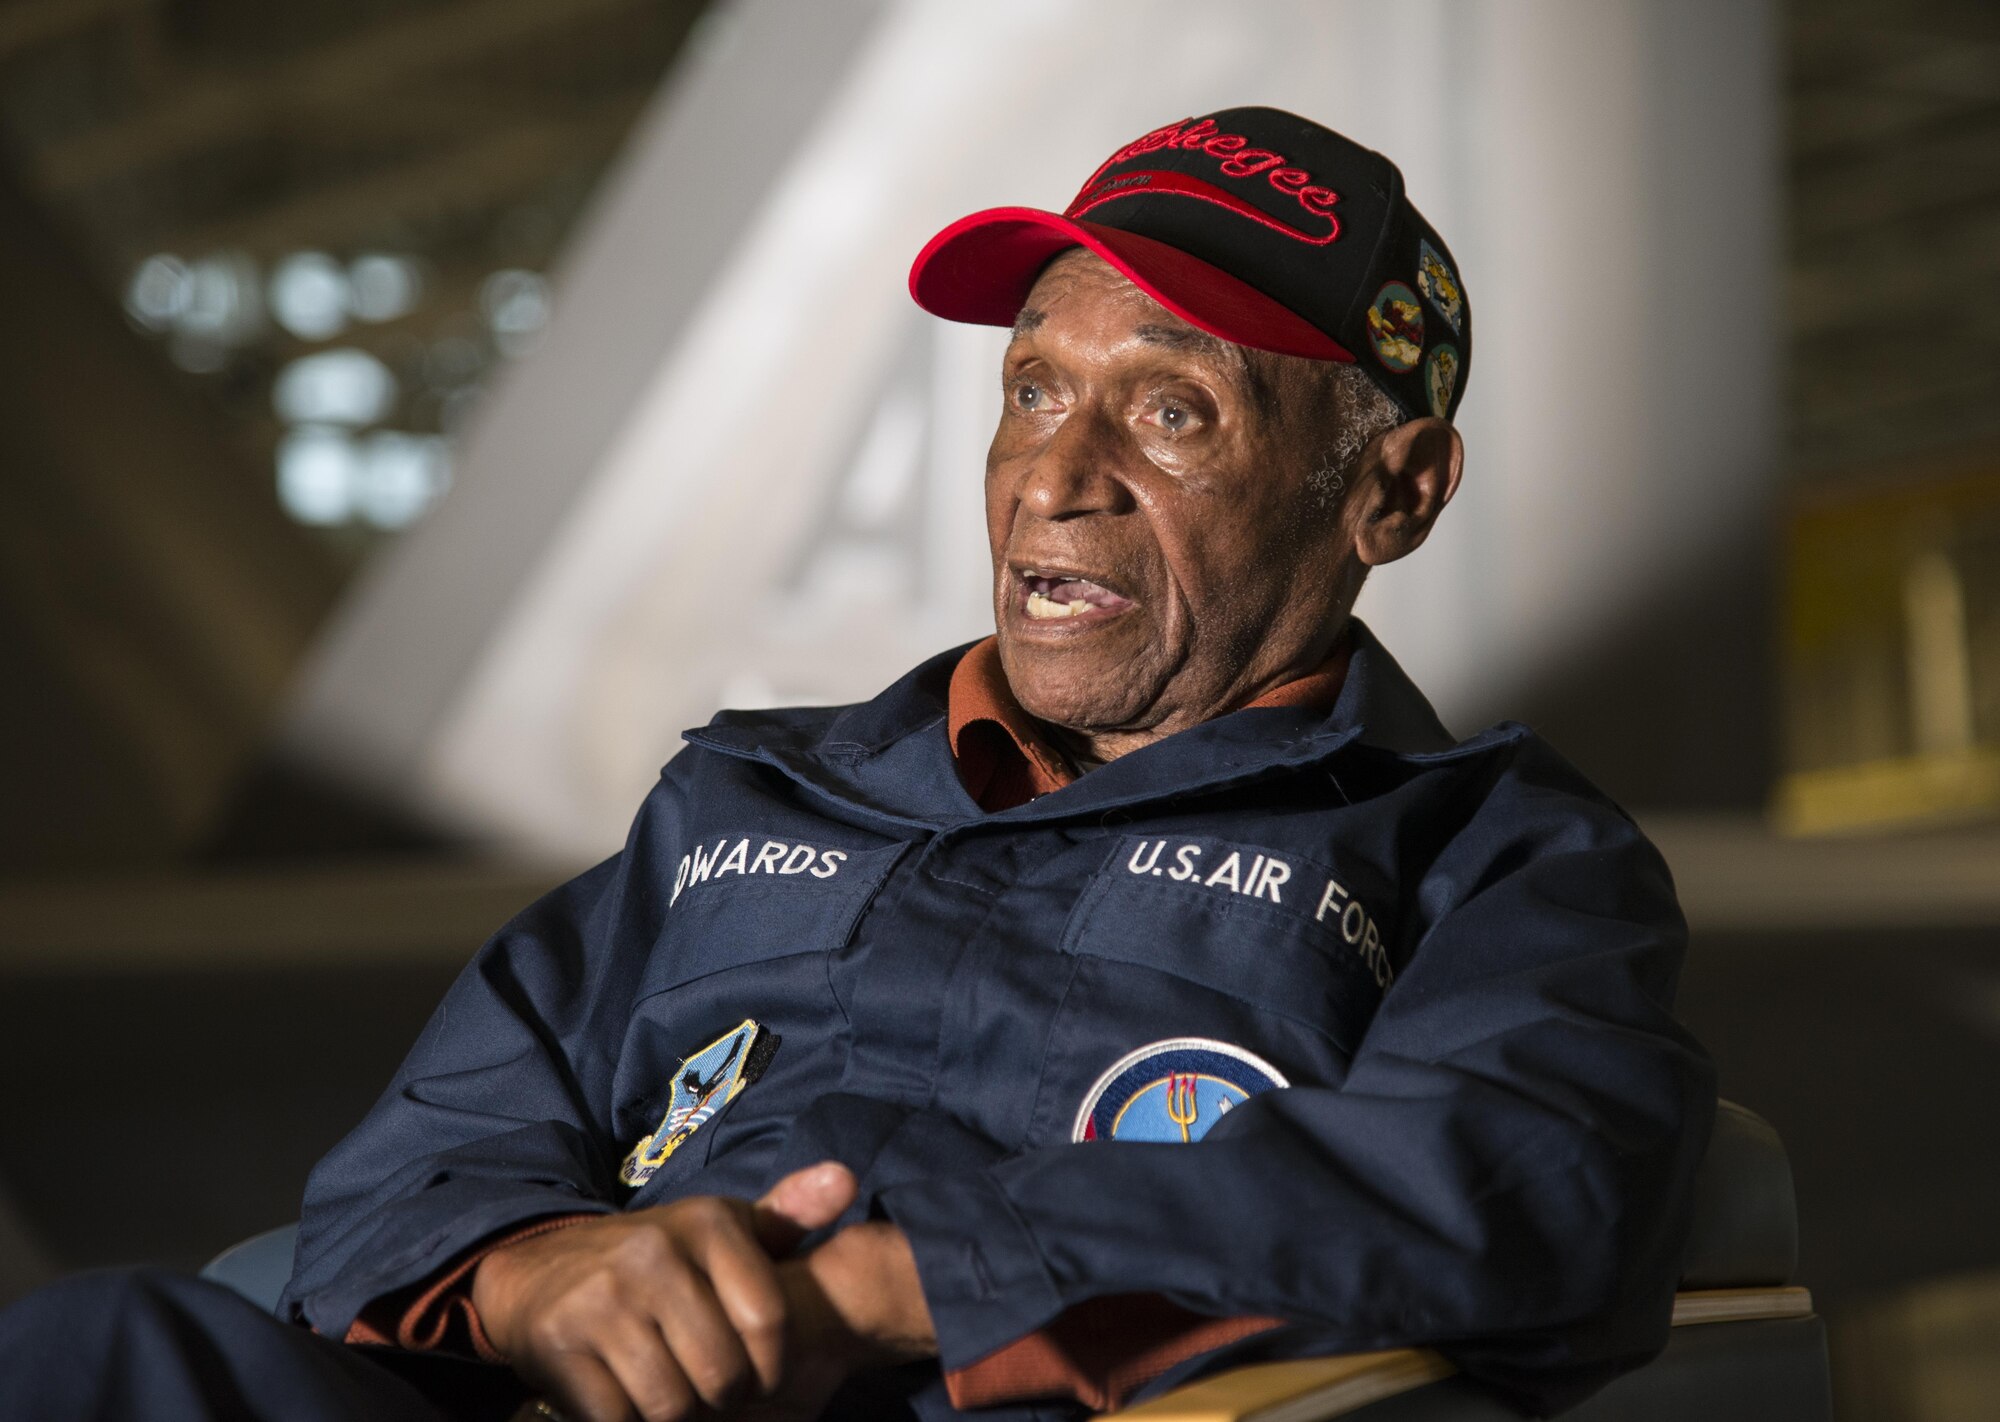 Army Air Corps Staff Sgt. Leslie Edwards, the last living Tuskegee Airman  of the 477th Bombardment Group, speaks with historians at Joint Base Elmendorf-Richardson, Alaska, Oct. 14, 2017. In 2007, the 477th Bombardment Group became the 477th Fighter Group, bringing with it the legacy of Tuskegee Airmen to Alaska. (U.S. Air Force photo by Senior Airman Curt Beach)